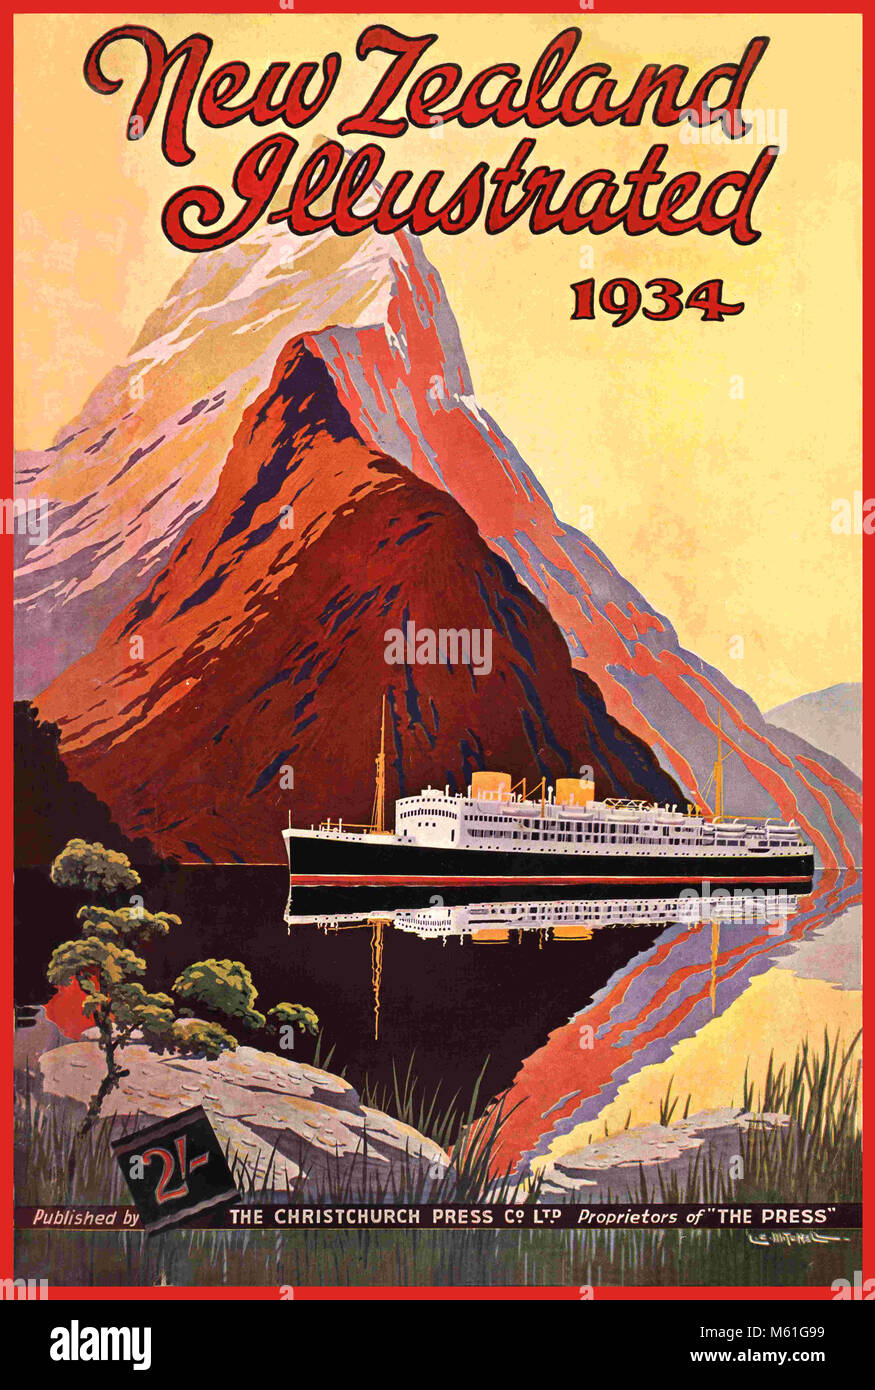 Vintage retro 1930's New Zealand Illustrated Magazine Cover featuring a traditional two funnel steamship cruising in calm waters Stock Photo